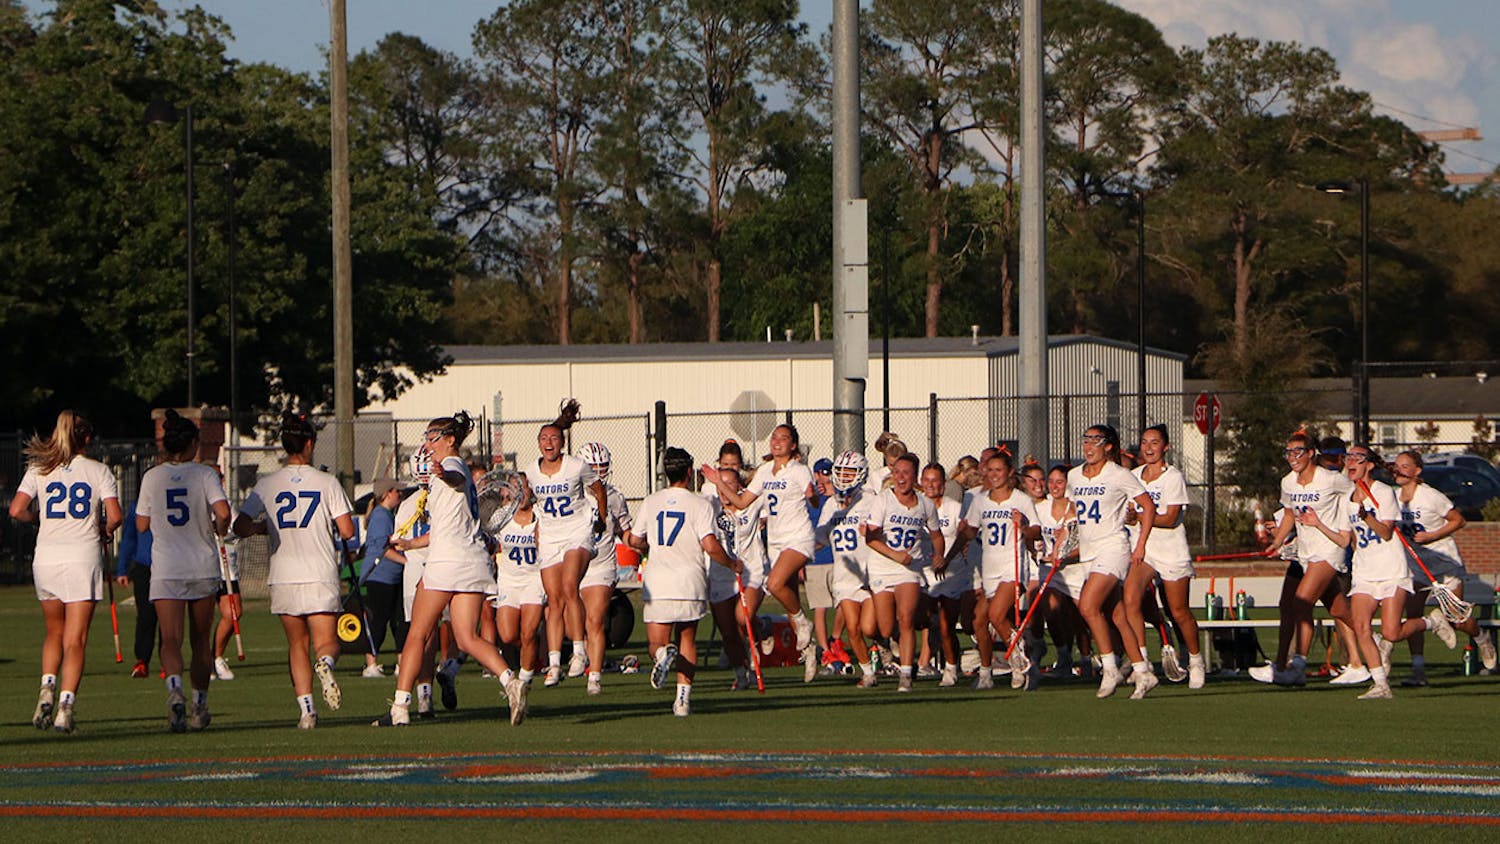 Florida lacrosse overcame a first-quarter deficit to take down the Vanderbilt Commodores 16-8 Saturday afternoon.